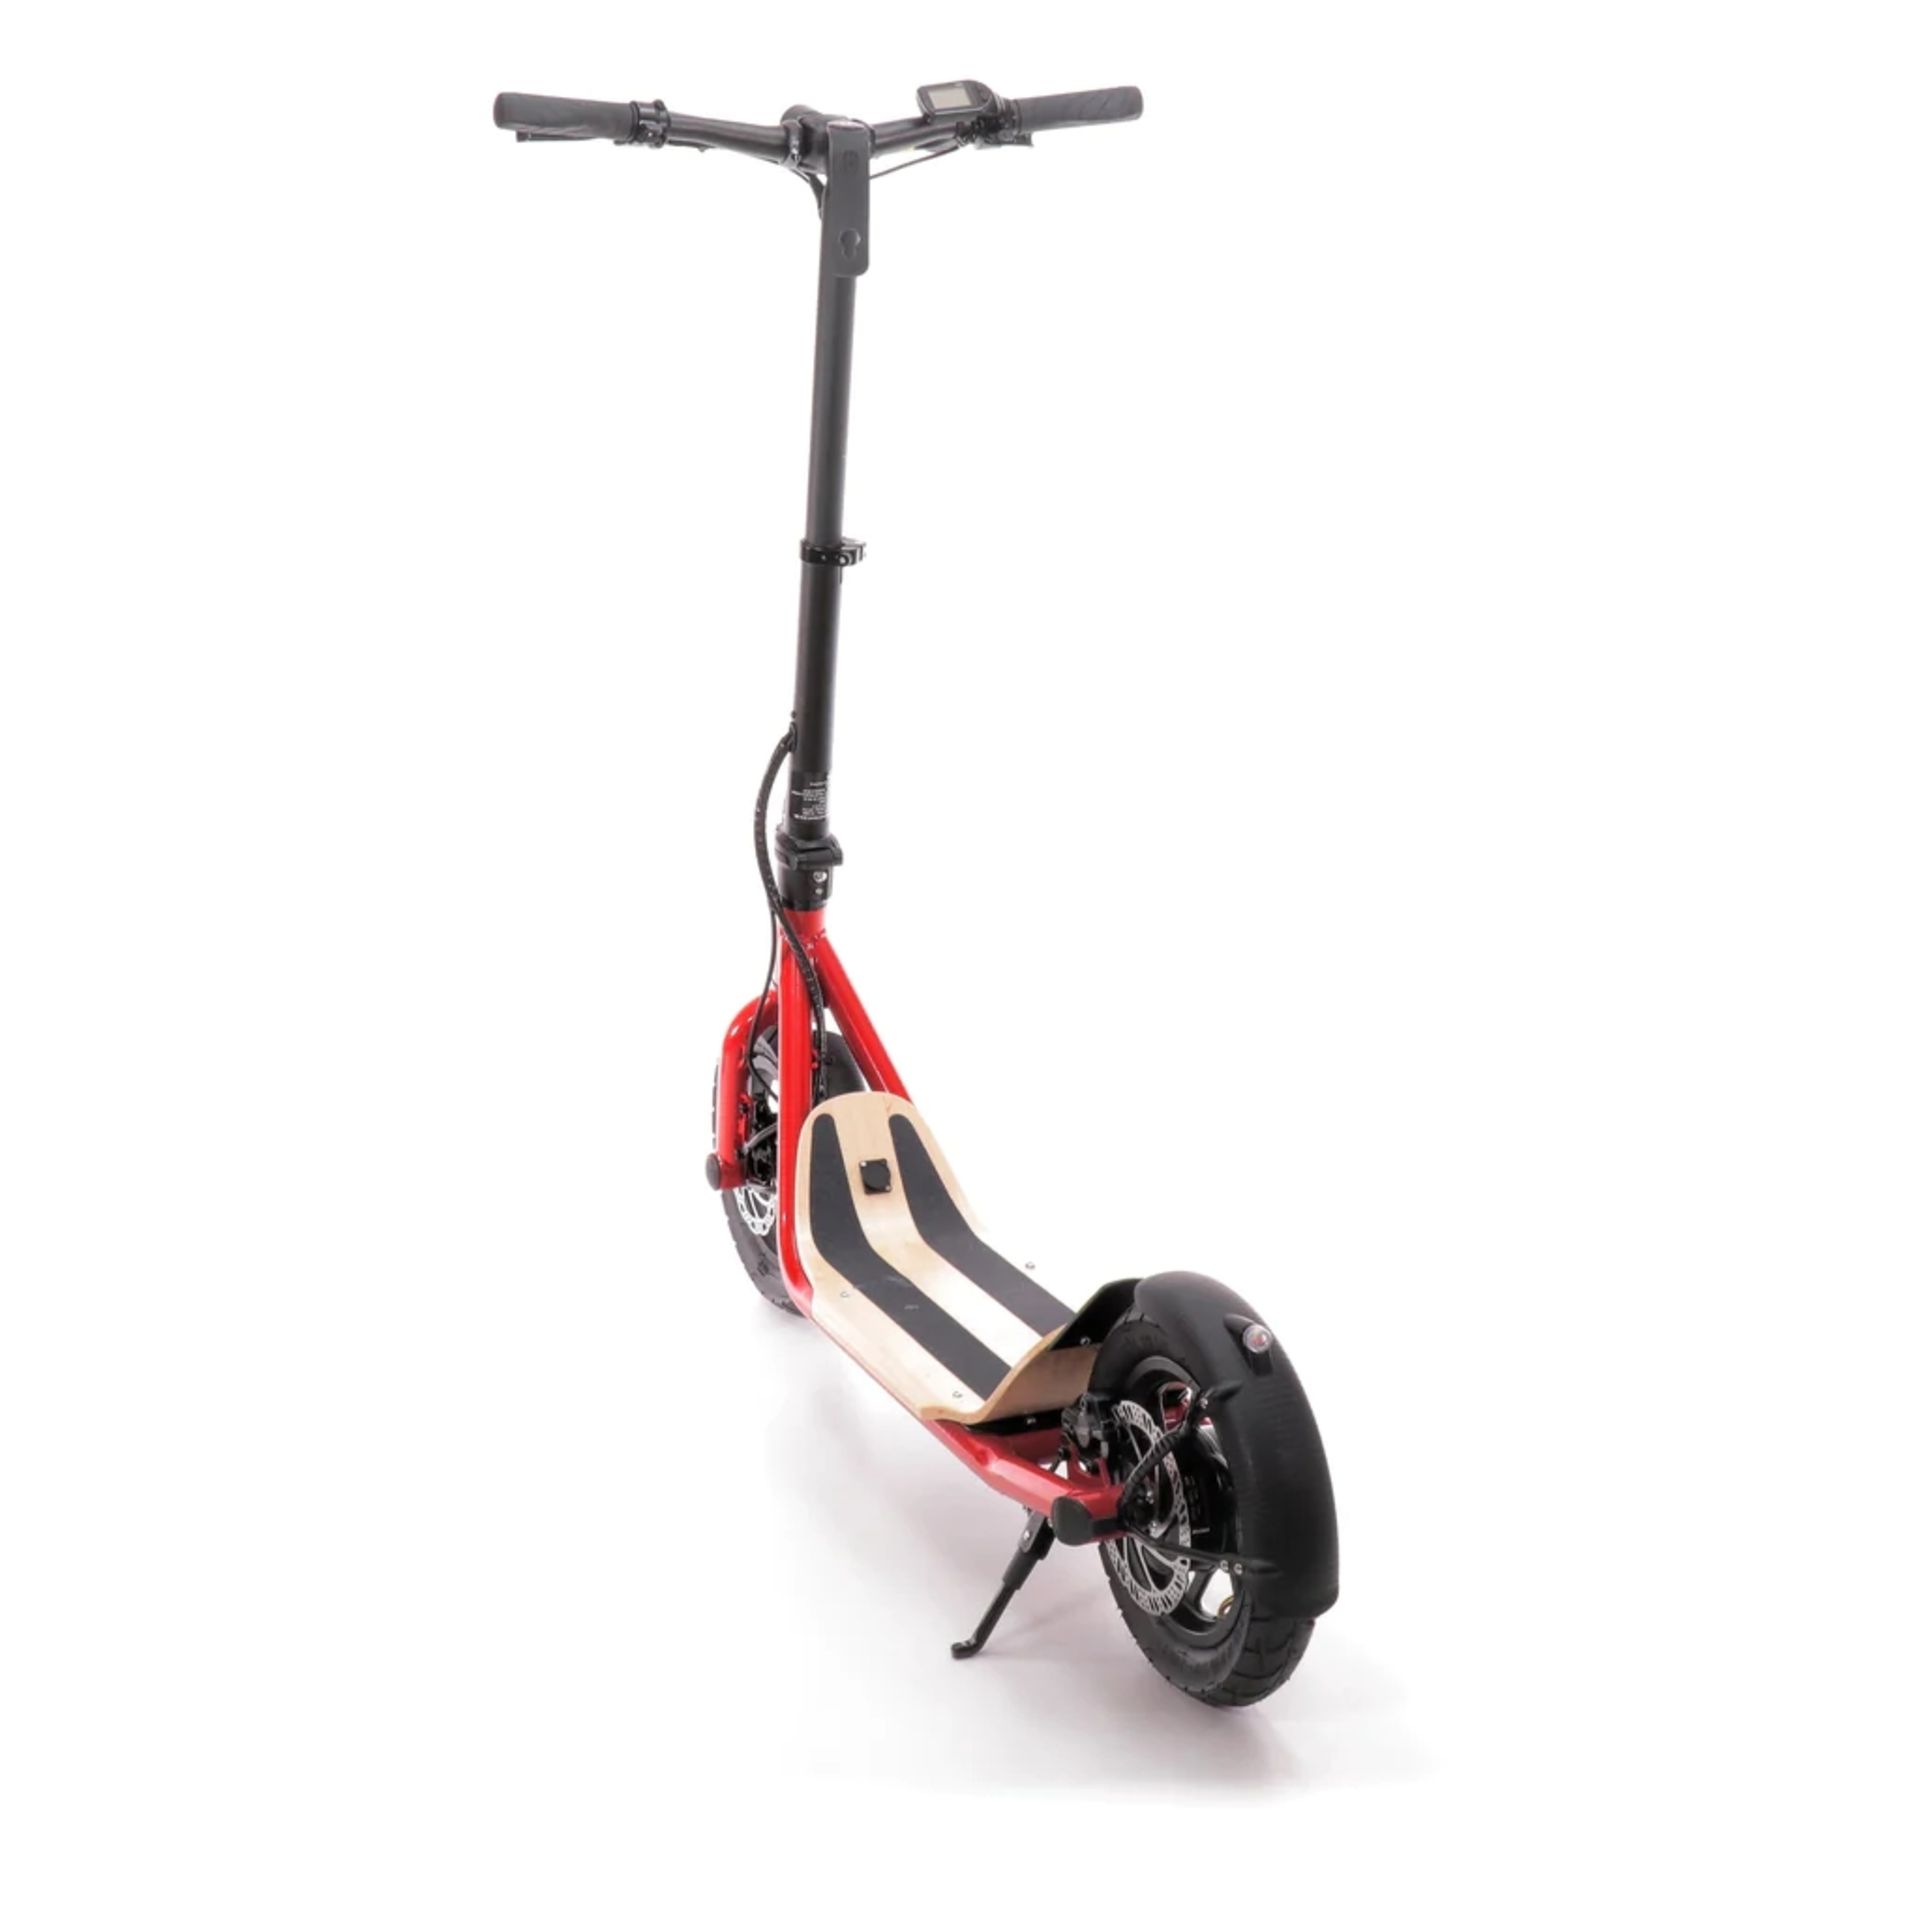 BRAND NEW 8TEV B12 PROXI CLASSIC ELECTRIC SCOOTER RED RRP £1299, Perfect city commuter vehicle - Bild 3 aus 3